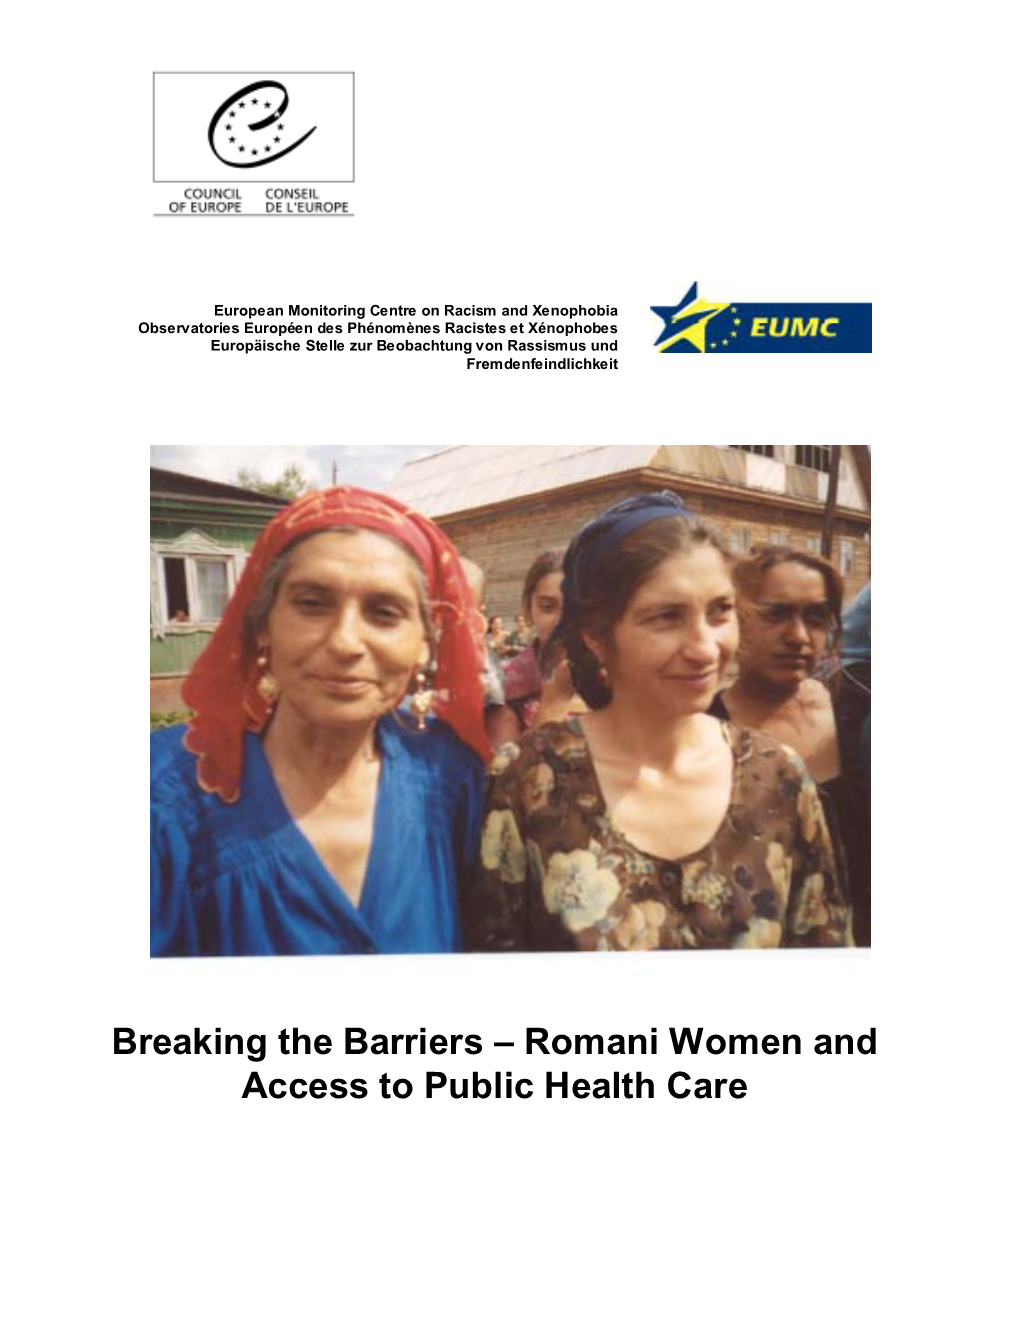 Breaking the Barriers – Romani Women and Access to Public